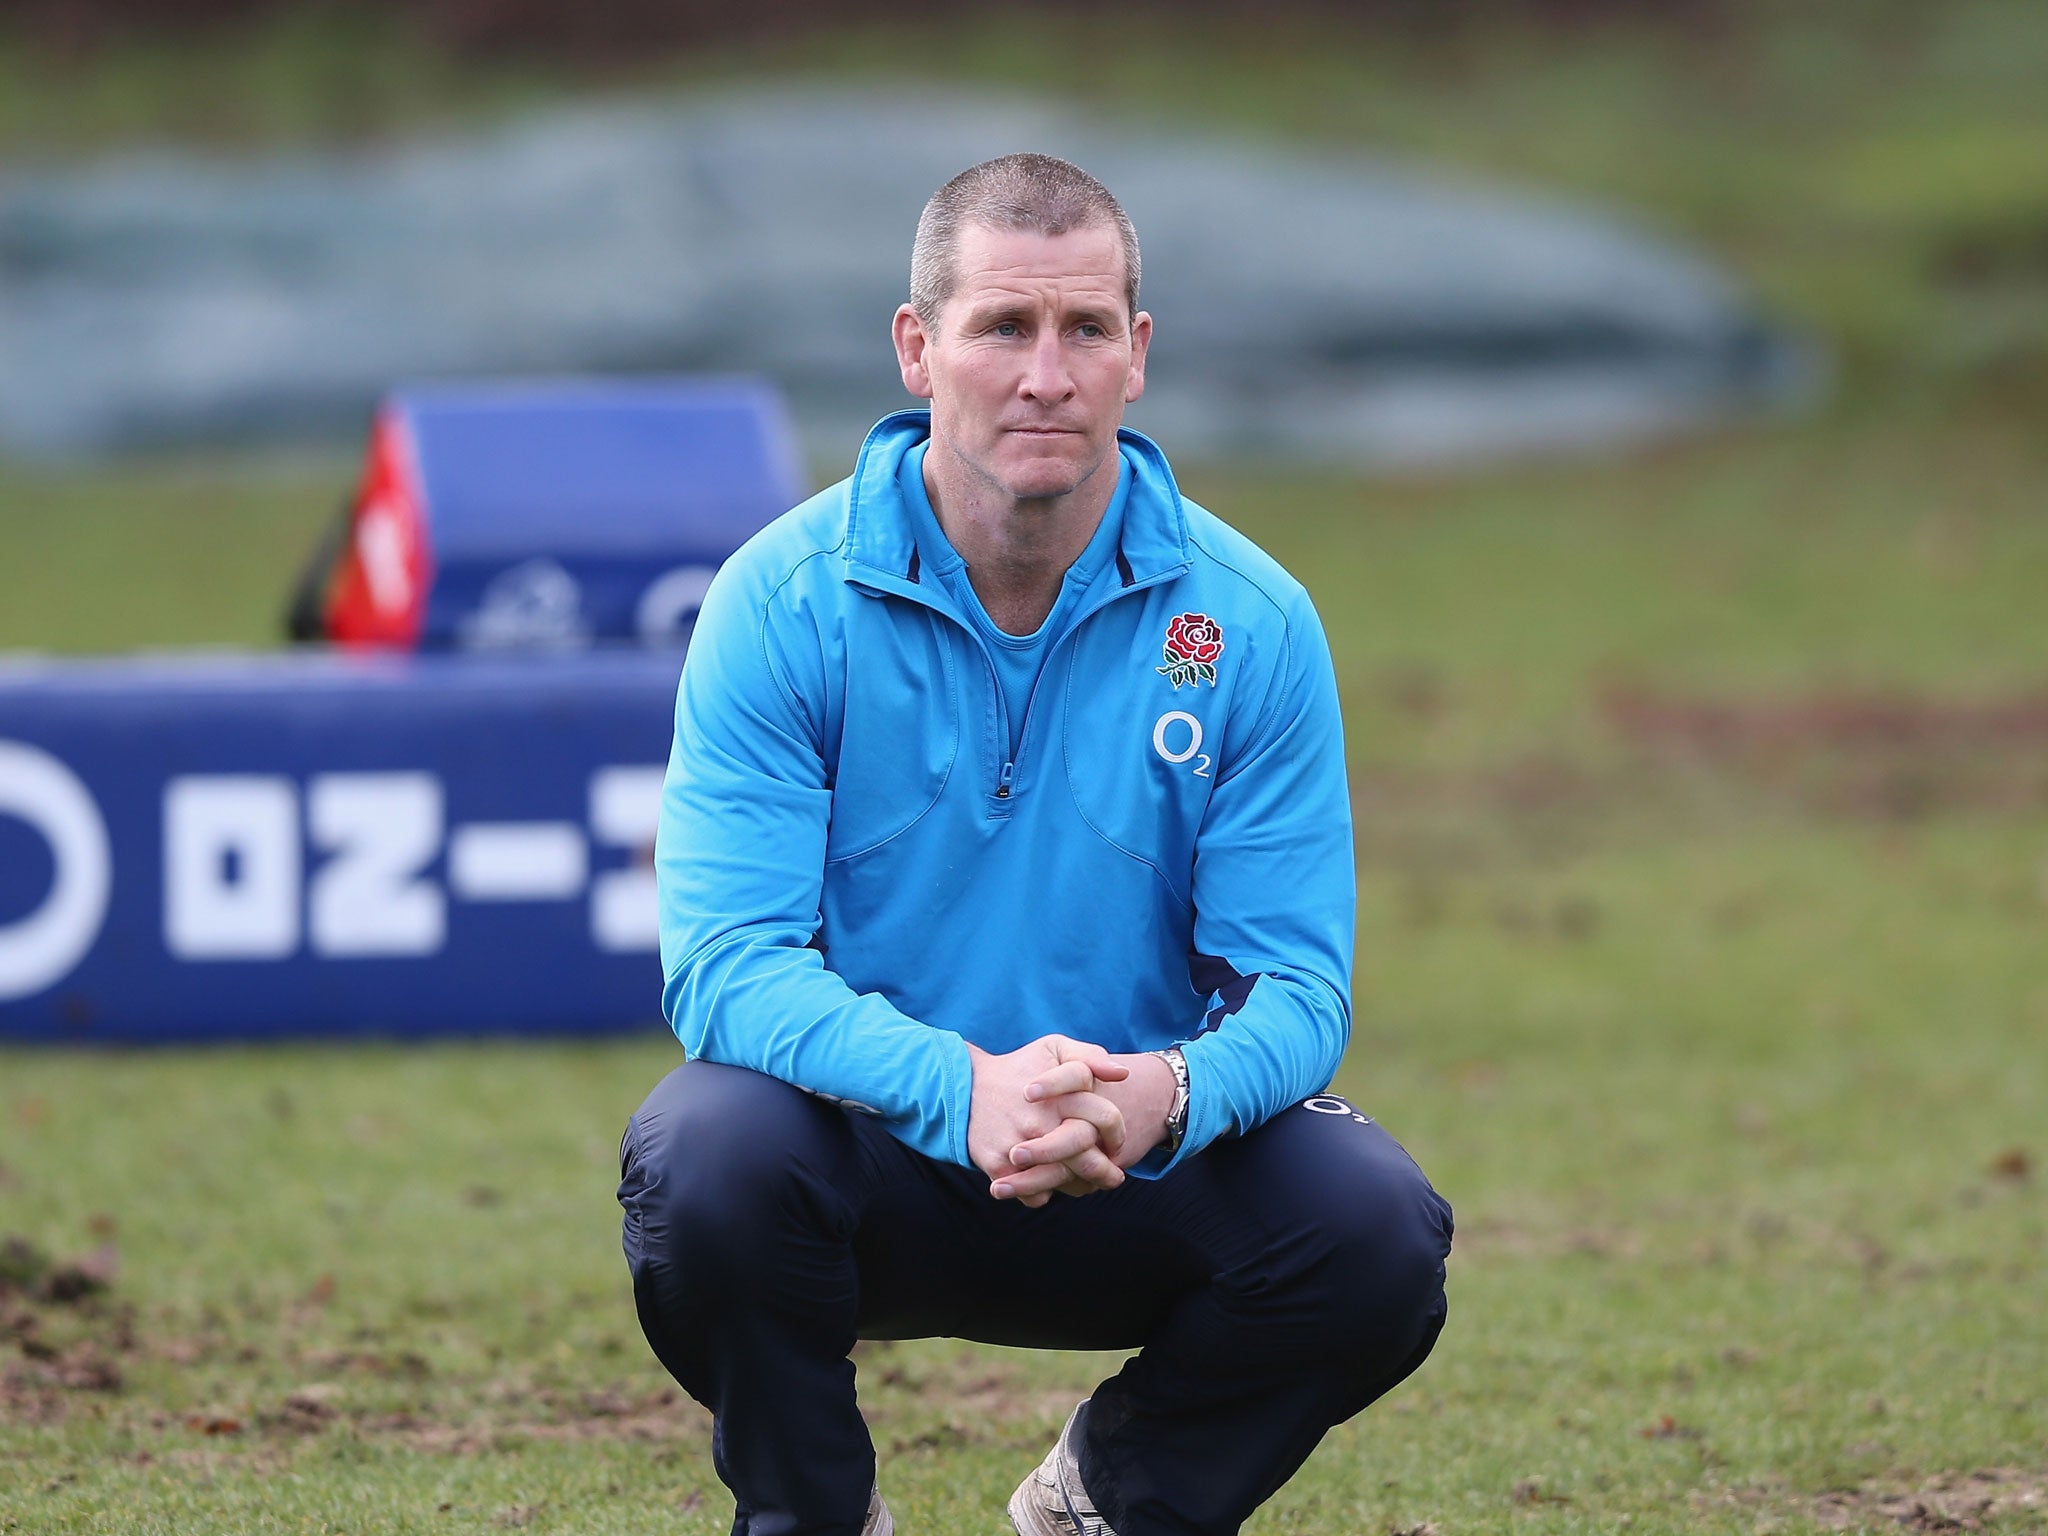 Stuart Lancaster: 'There are no international warm-up games'